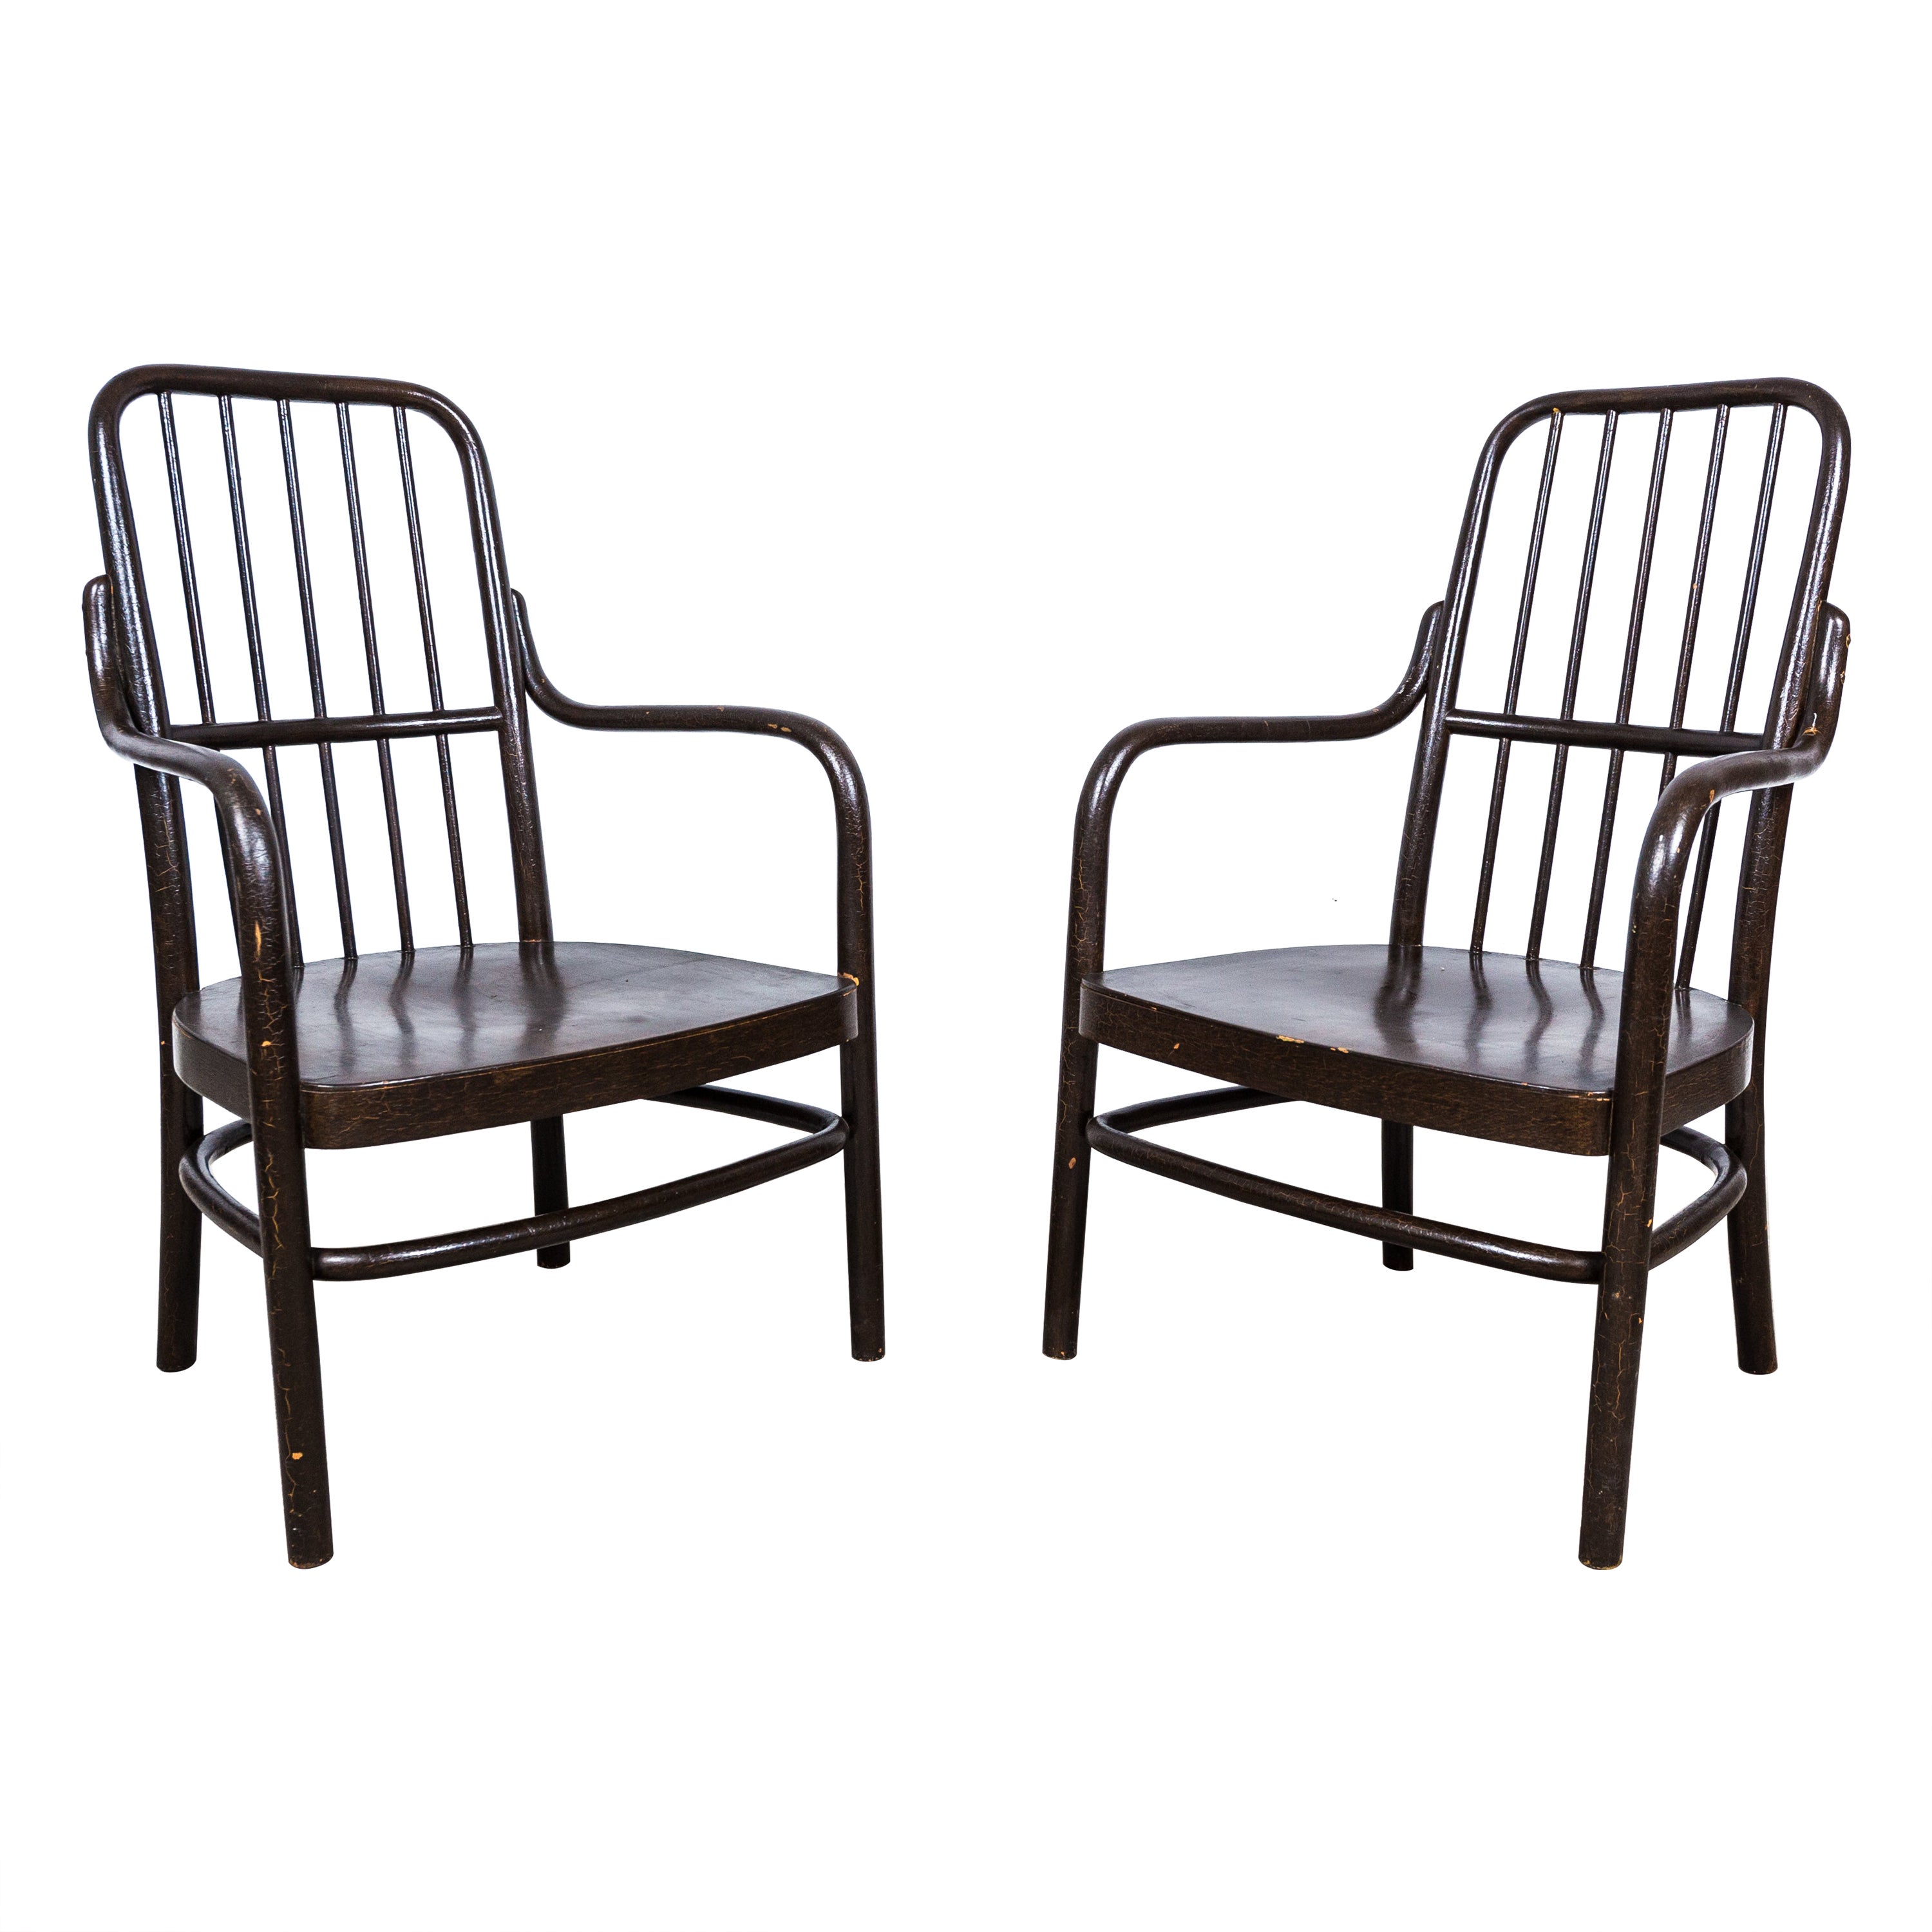 Josef Frank A 63/F Armchairs for Thonet, 1930s For Sale